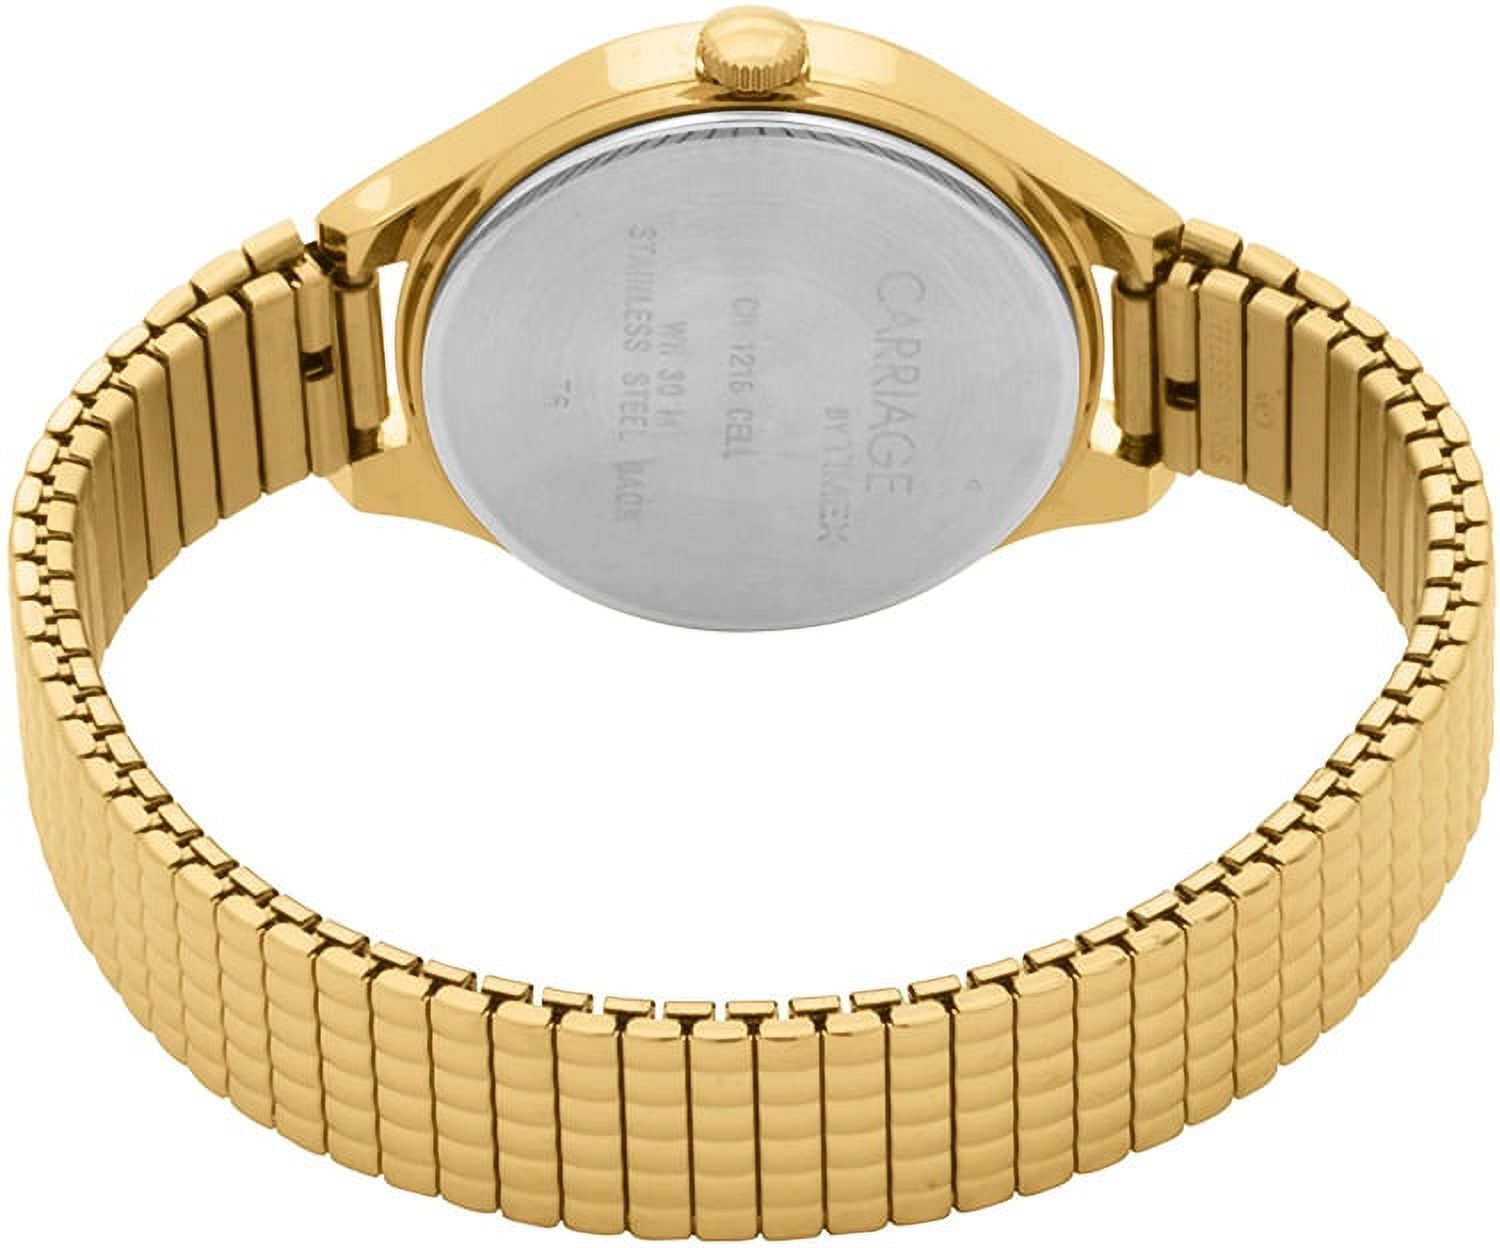 Carriage Women's Carolyn Watch, Gold-Tone Stainless Steel Expansion Band - image 2 of 3